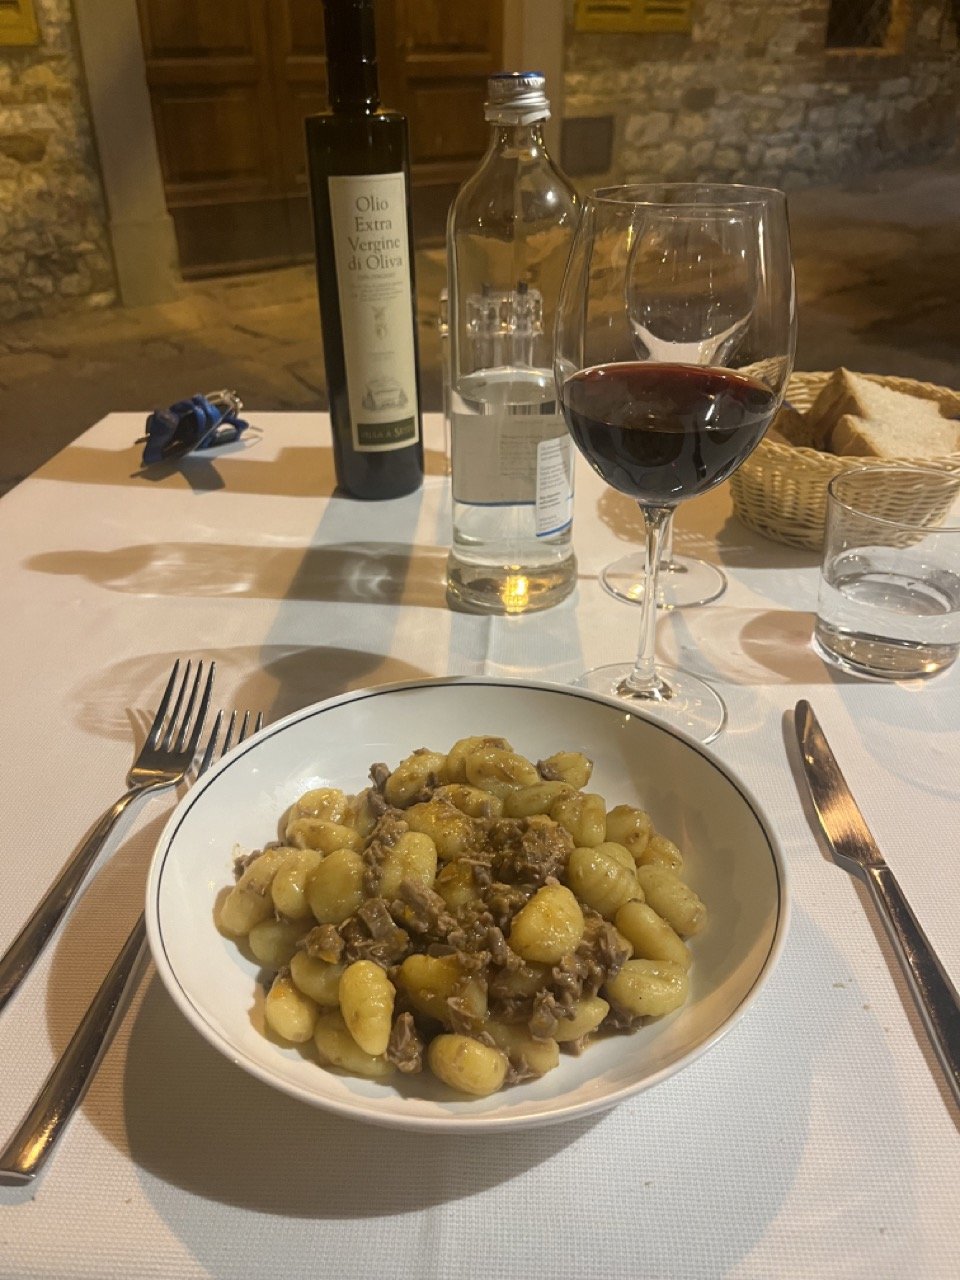 A plate of pasta with a glass of red wine in front of it at a restaurant near to Castelnuovo Berardenga in Tuscany's Chianti wine region.